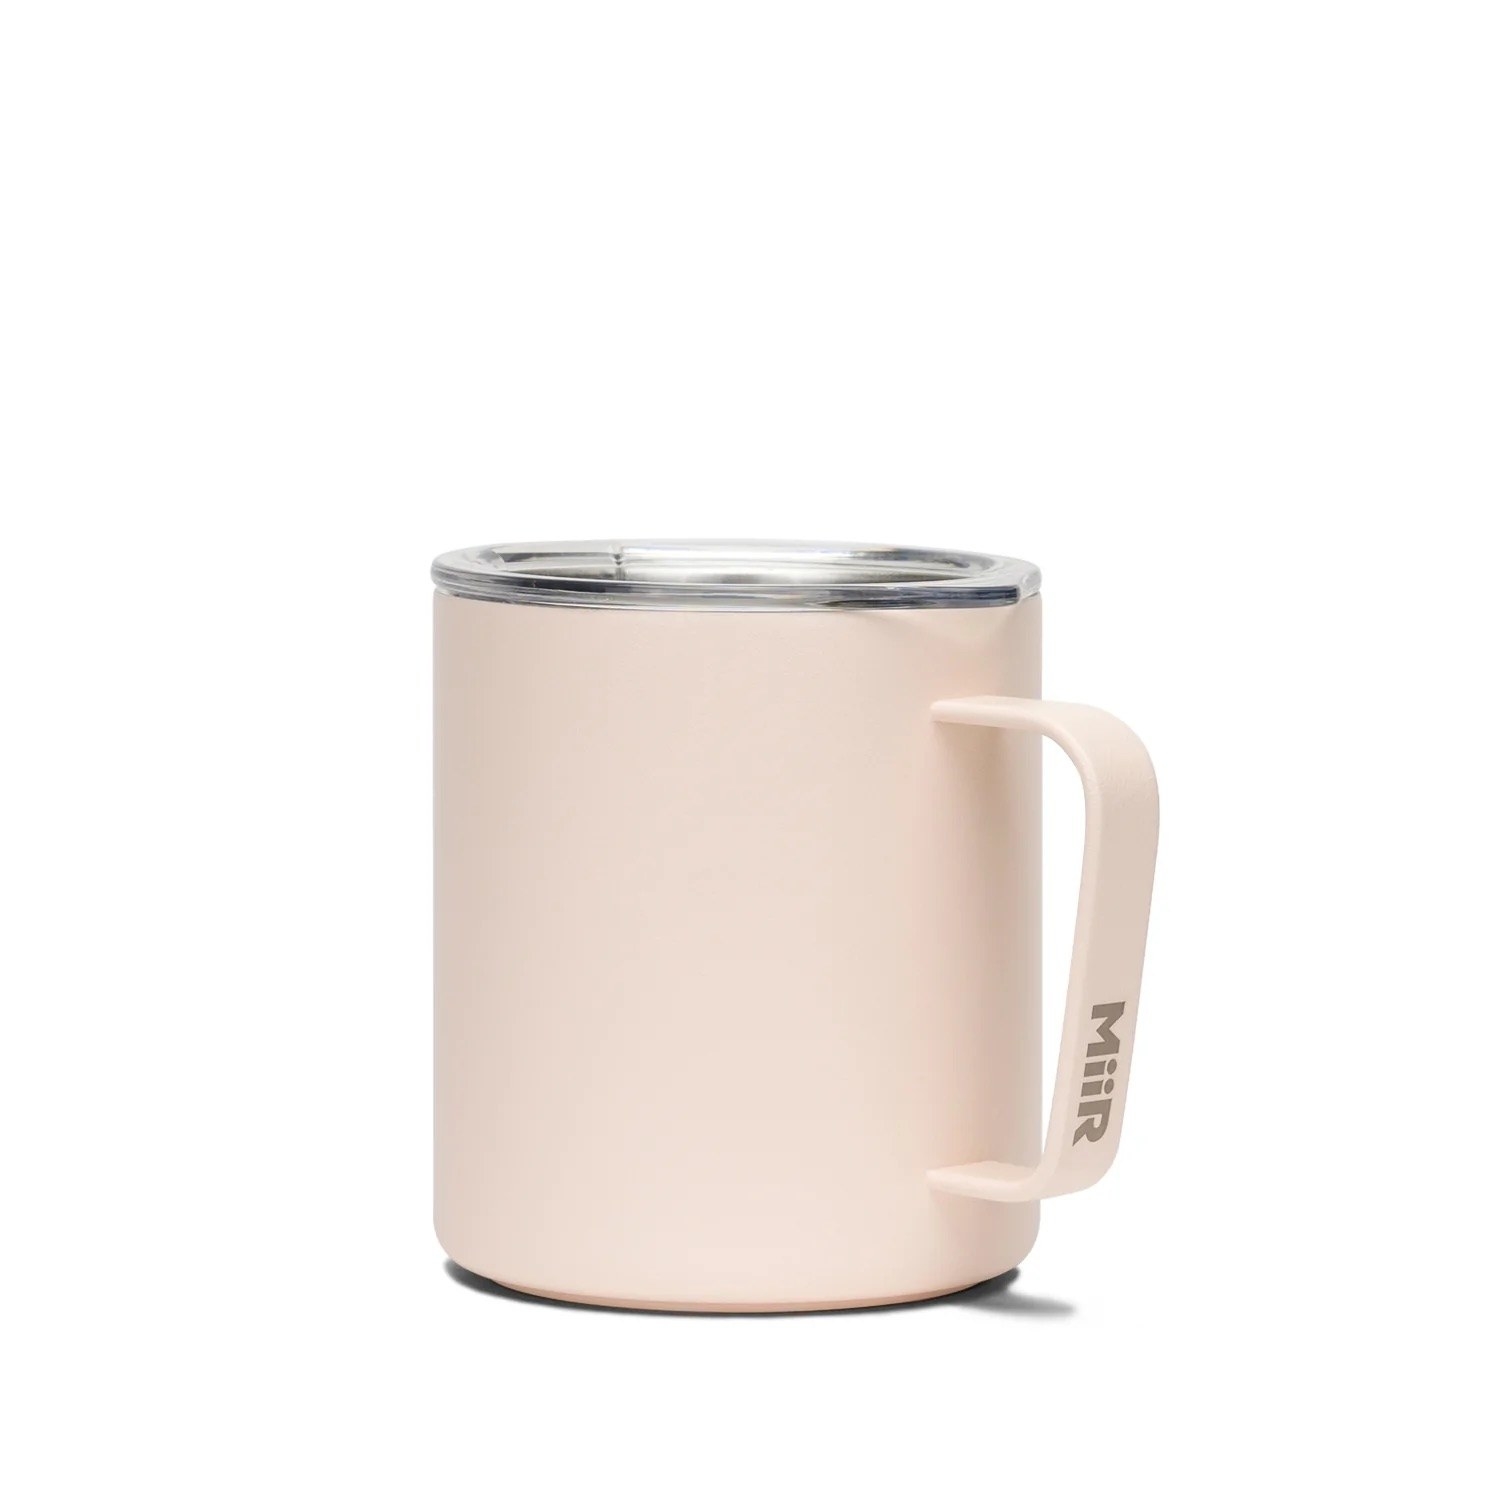 A light pink short mug with a handle and a clear lid